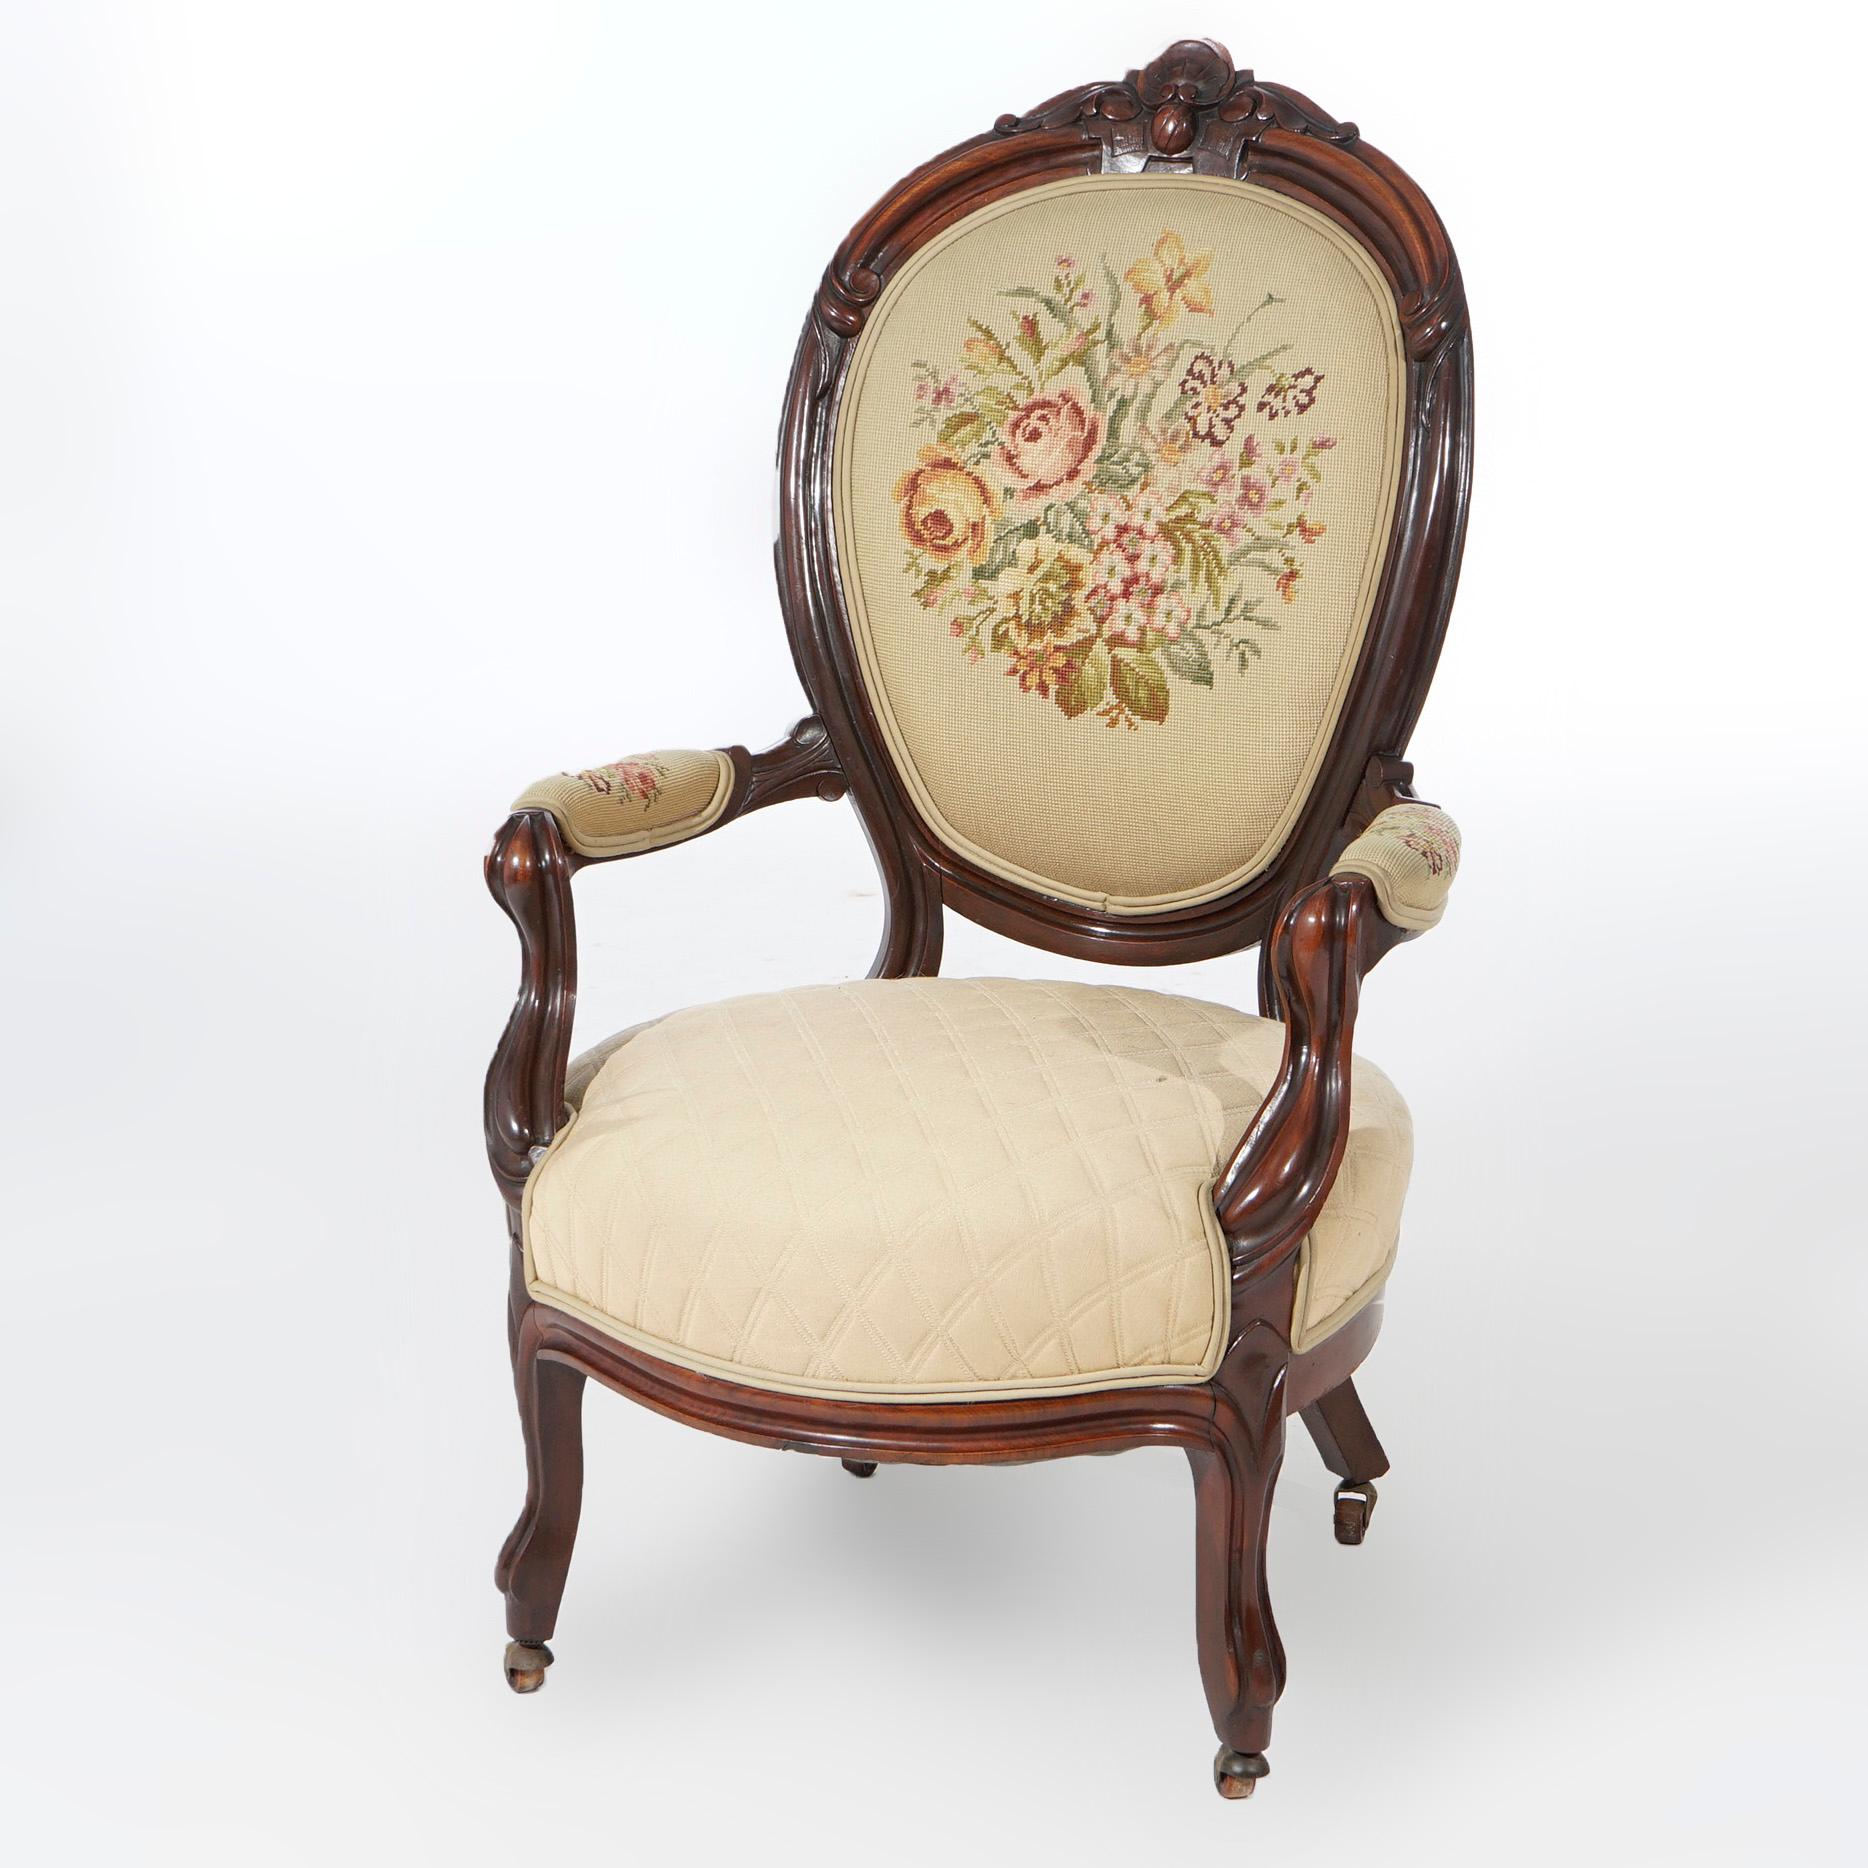 An antique parlor set offers walnut construction with carved foliate and shell crest over floral needlepoint backs and seats, raised on cabriole legs; set includes gents armchair and ladies side chair, c1890

Measures-
Ladies side chair 42'' H x